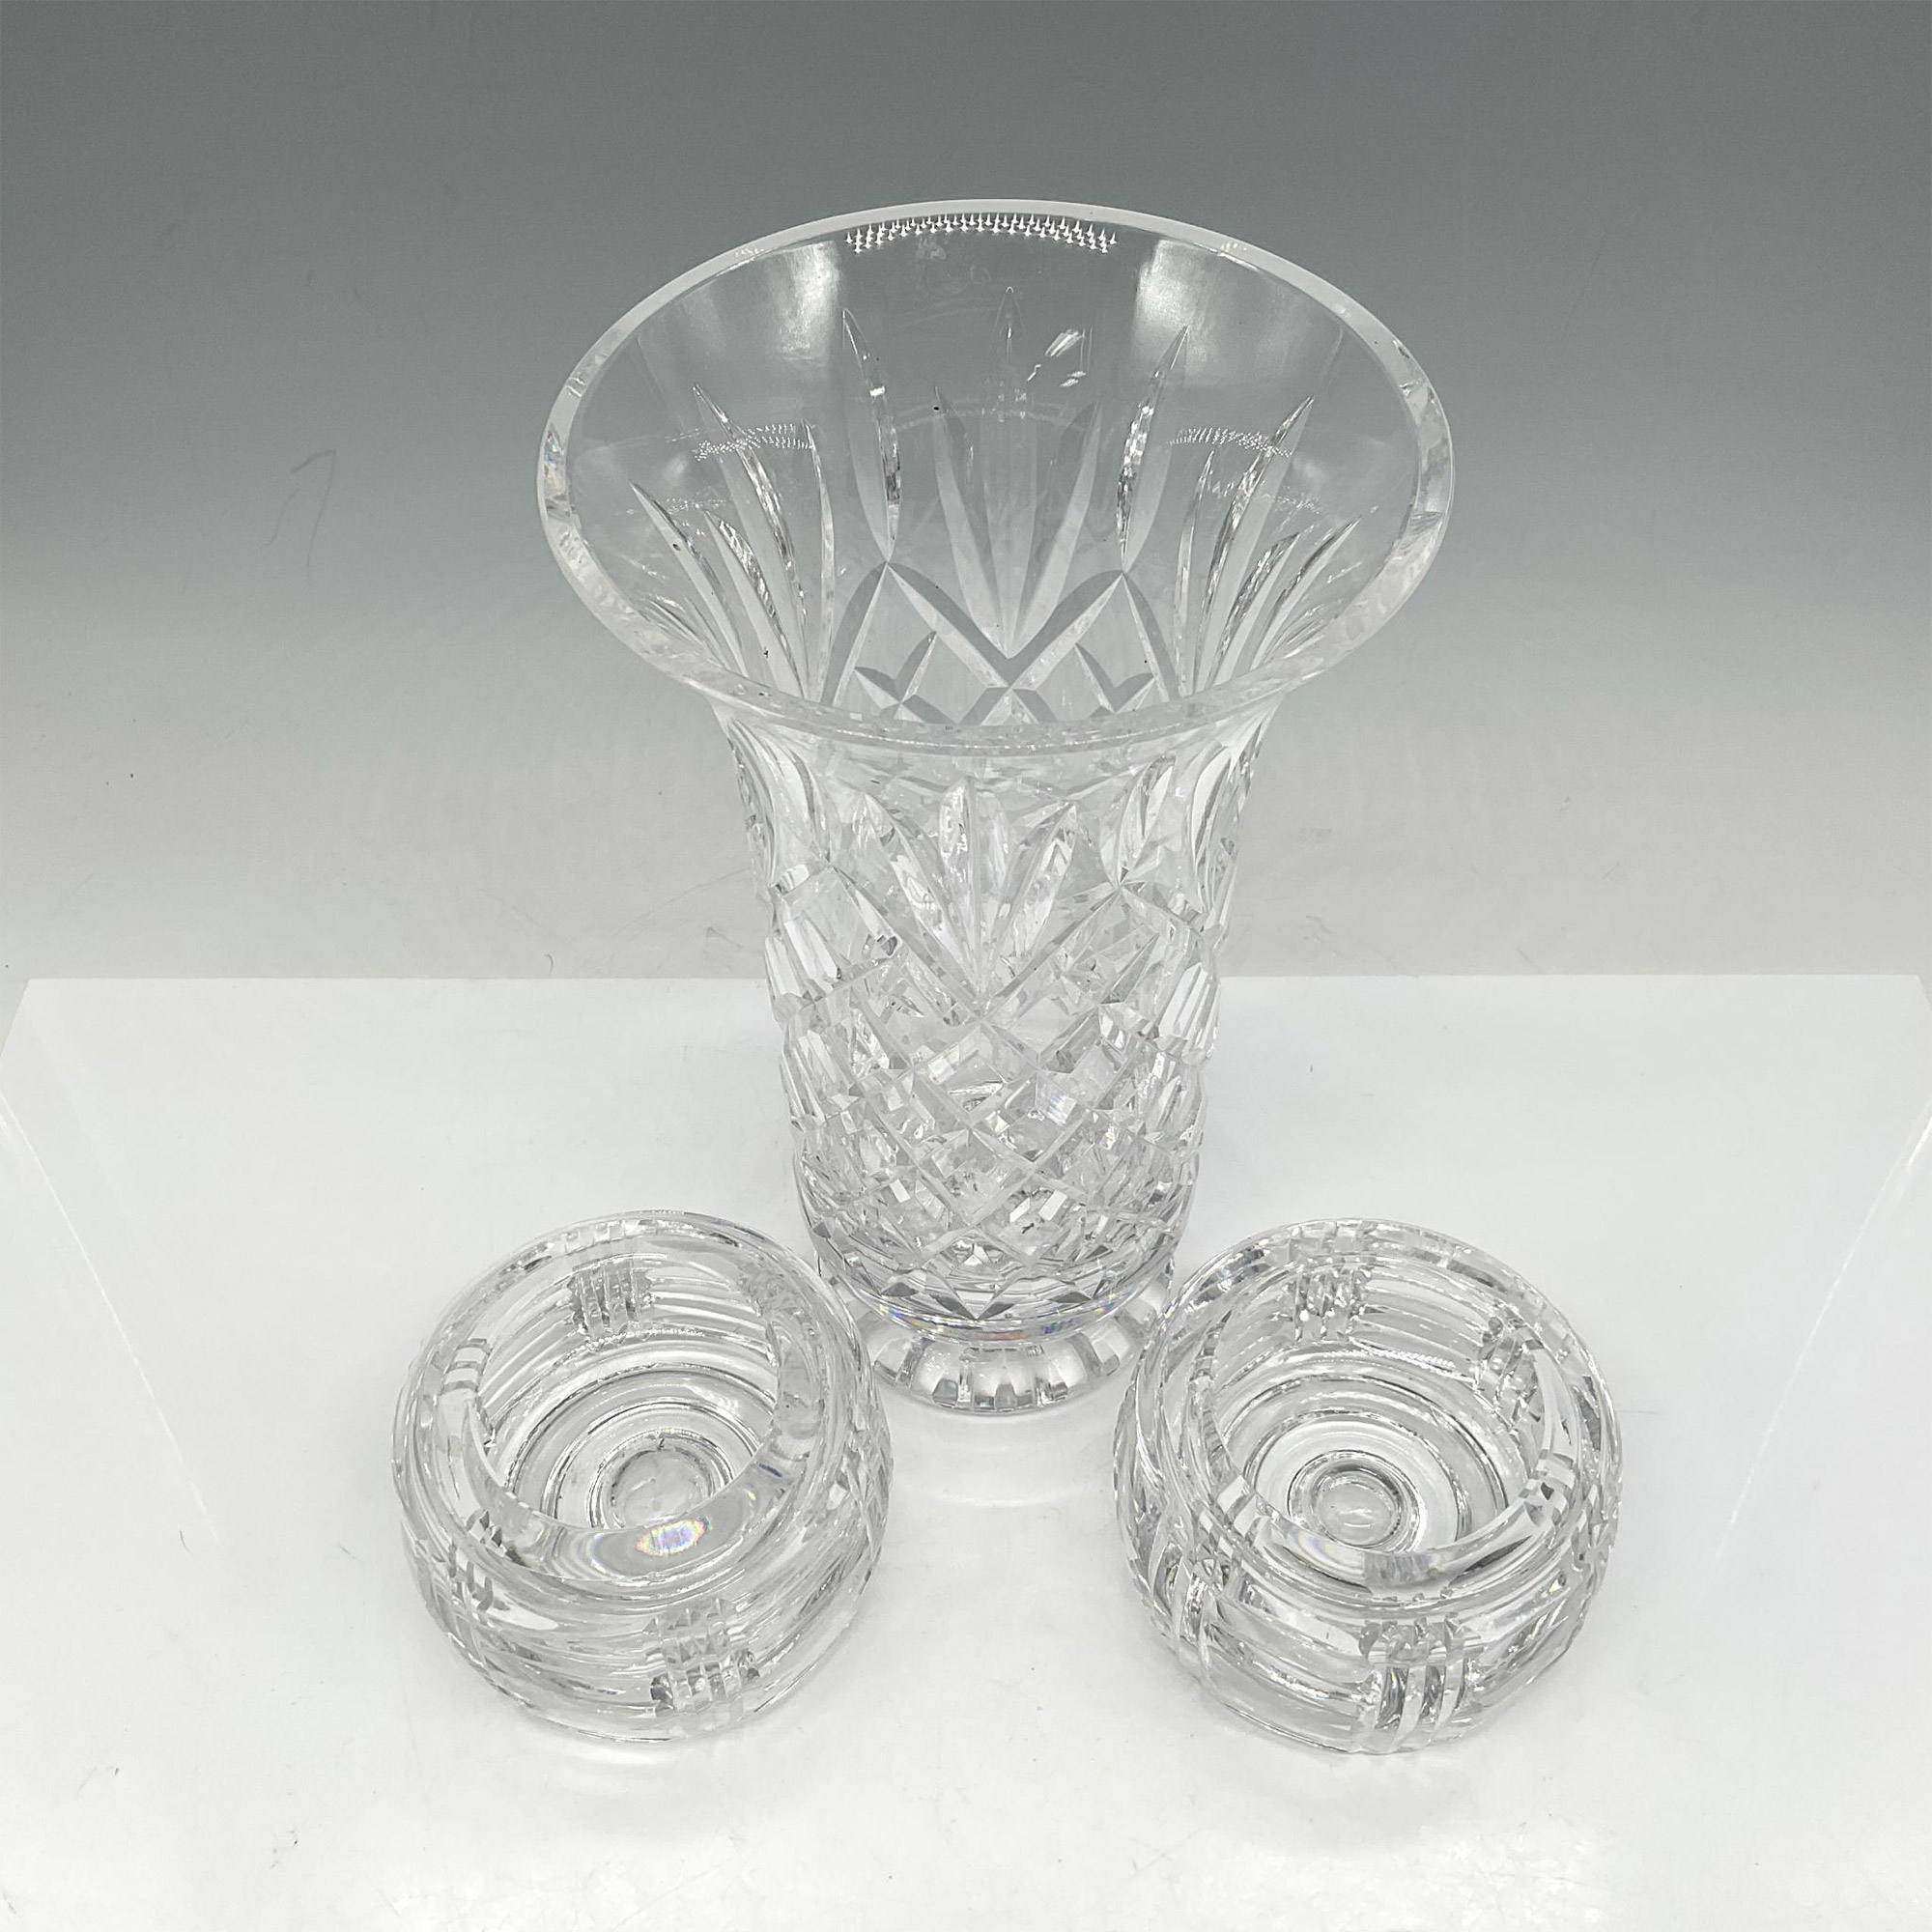 3pc Waterford Crystal Vase & Barrel Candle Holders - Image 2 of 3